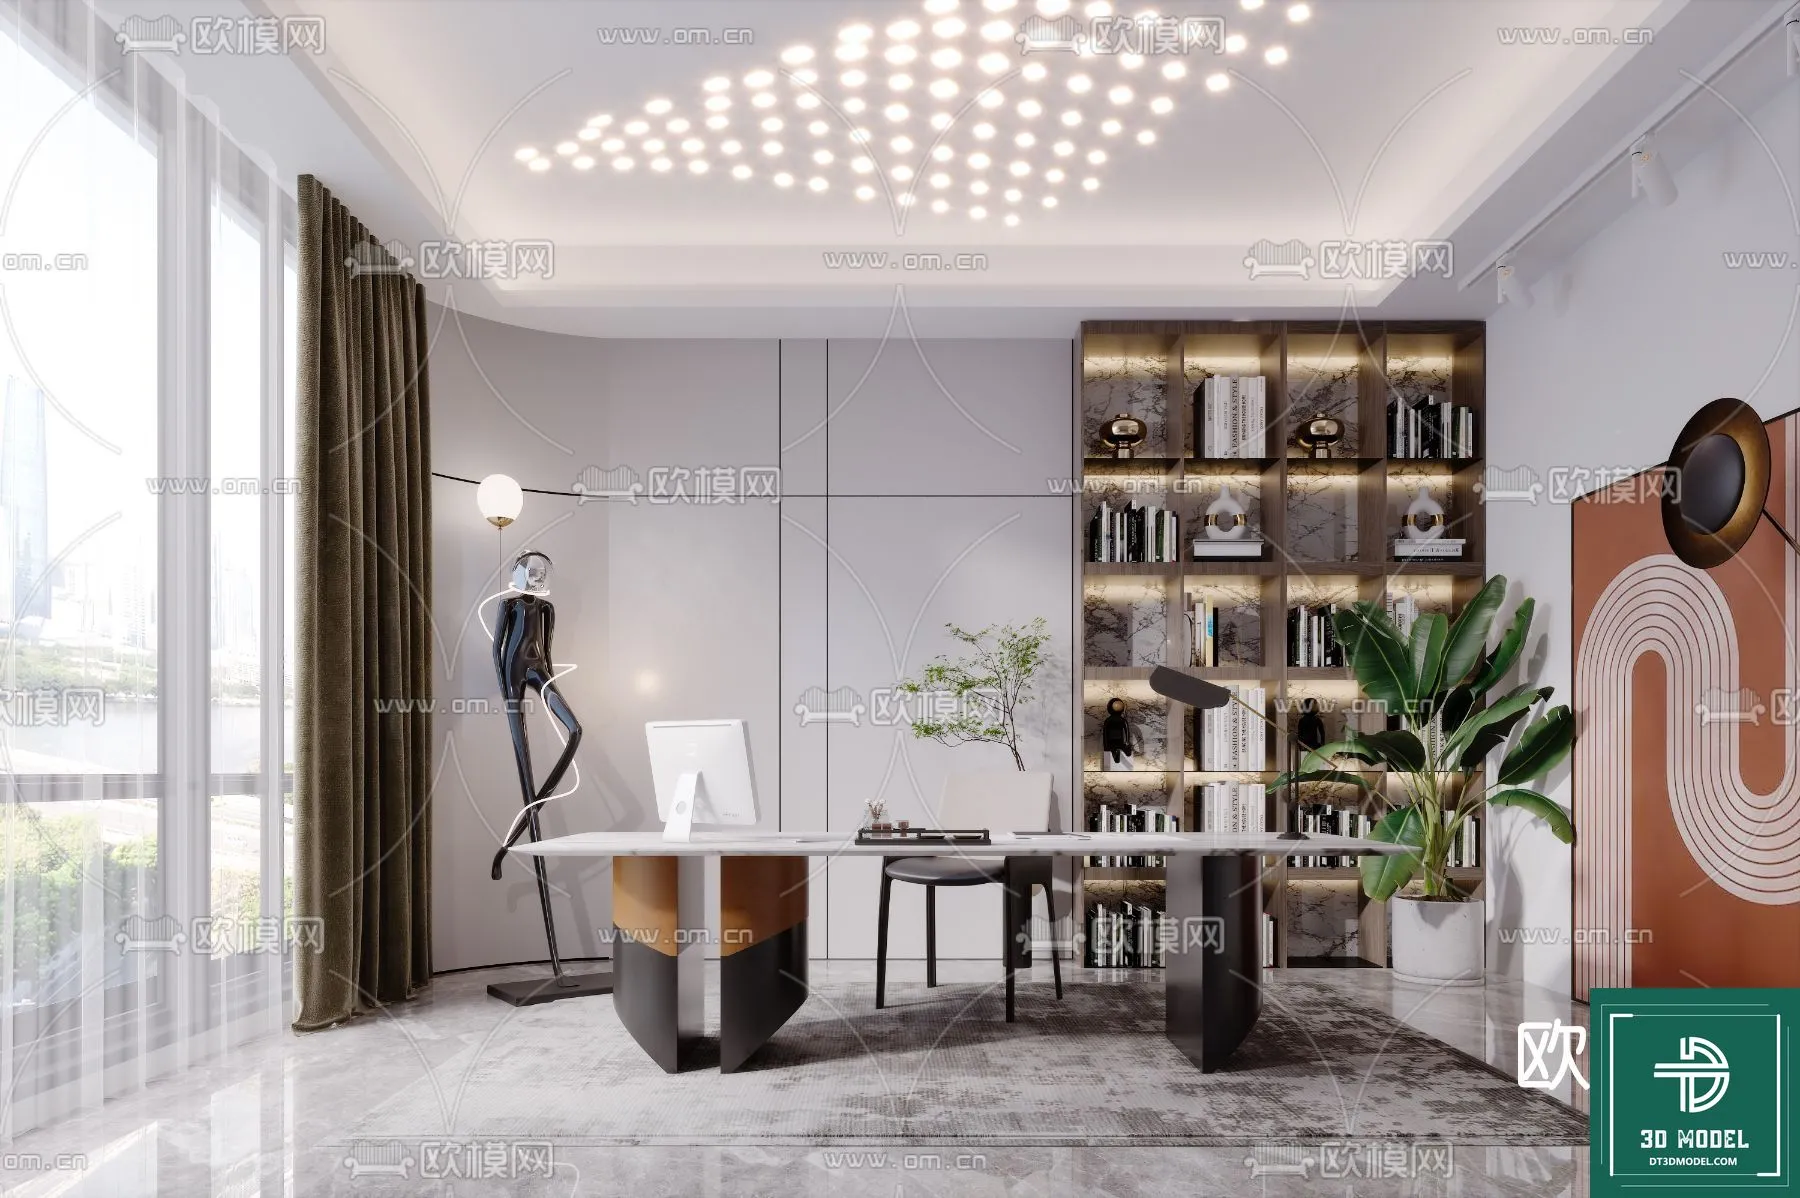 OFFICE ROOM FOR MANAGER – 3DMODEL – 012